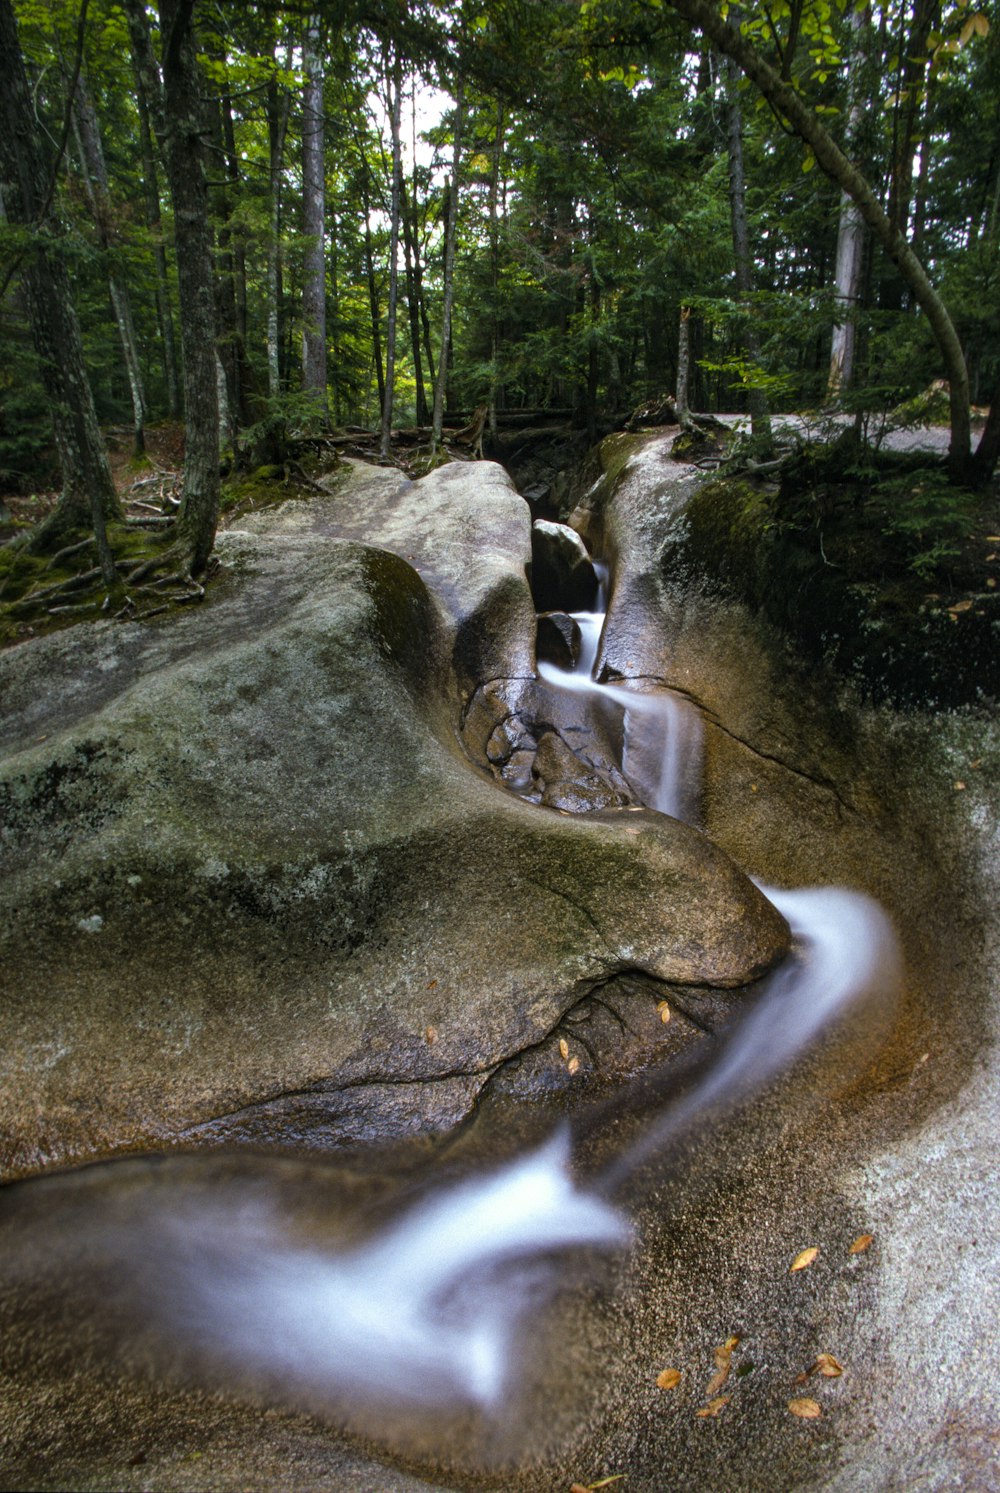 a long exposure photo of a stream in the woods